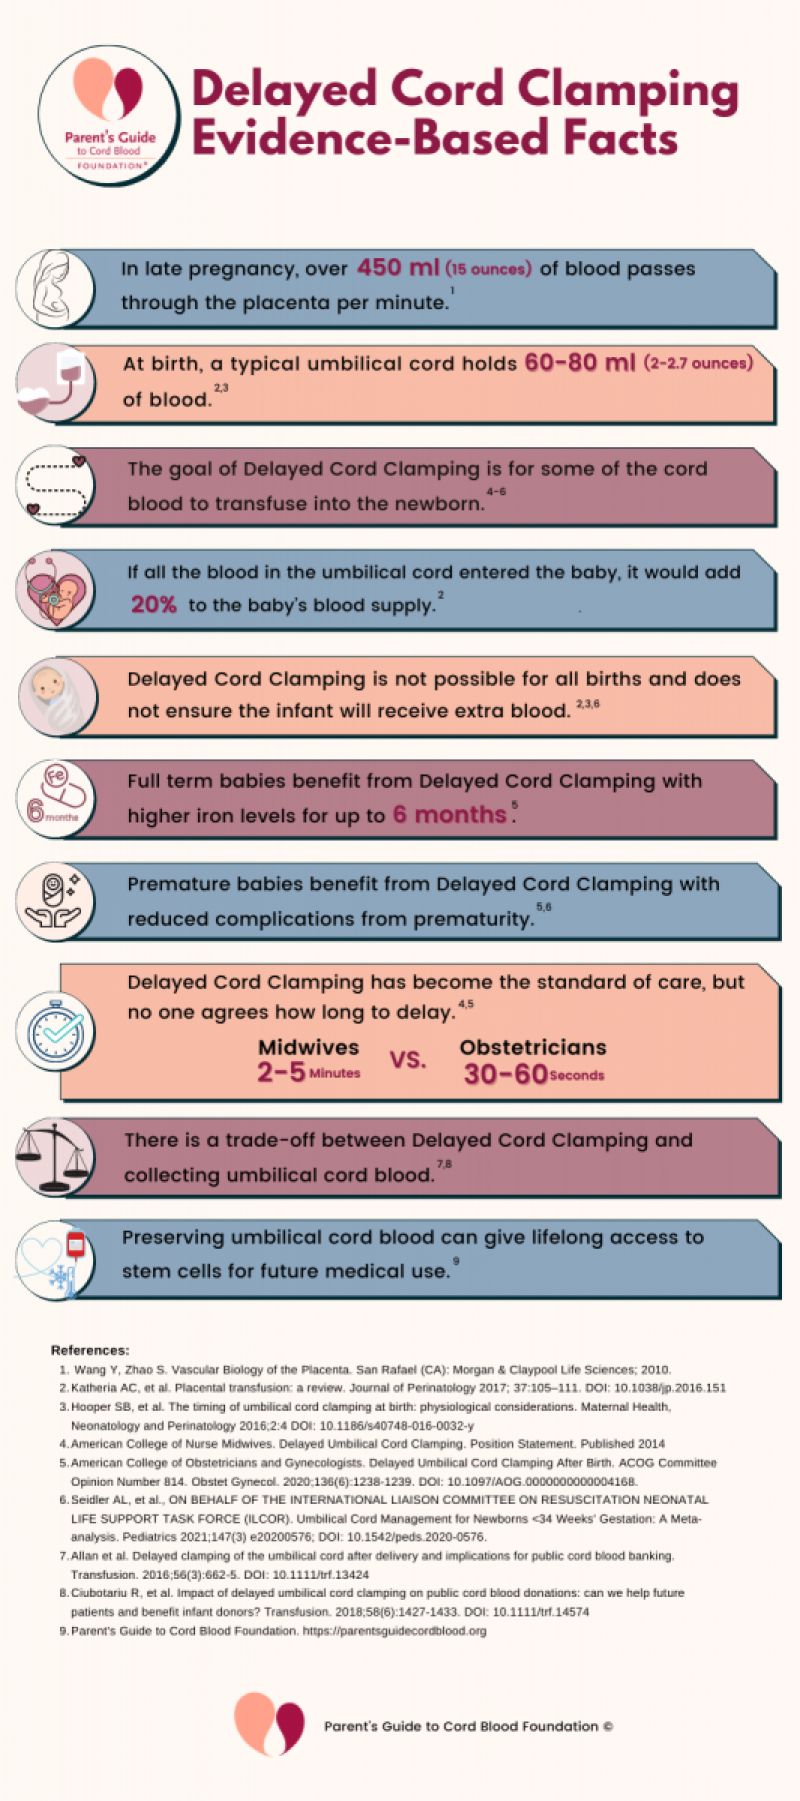 Delayed Cord Clamping: Evidence-Based Facts